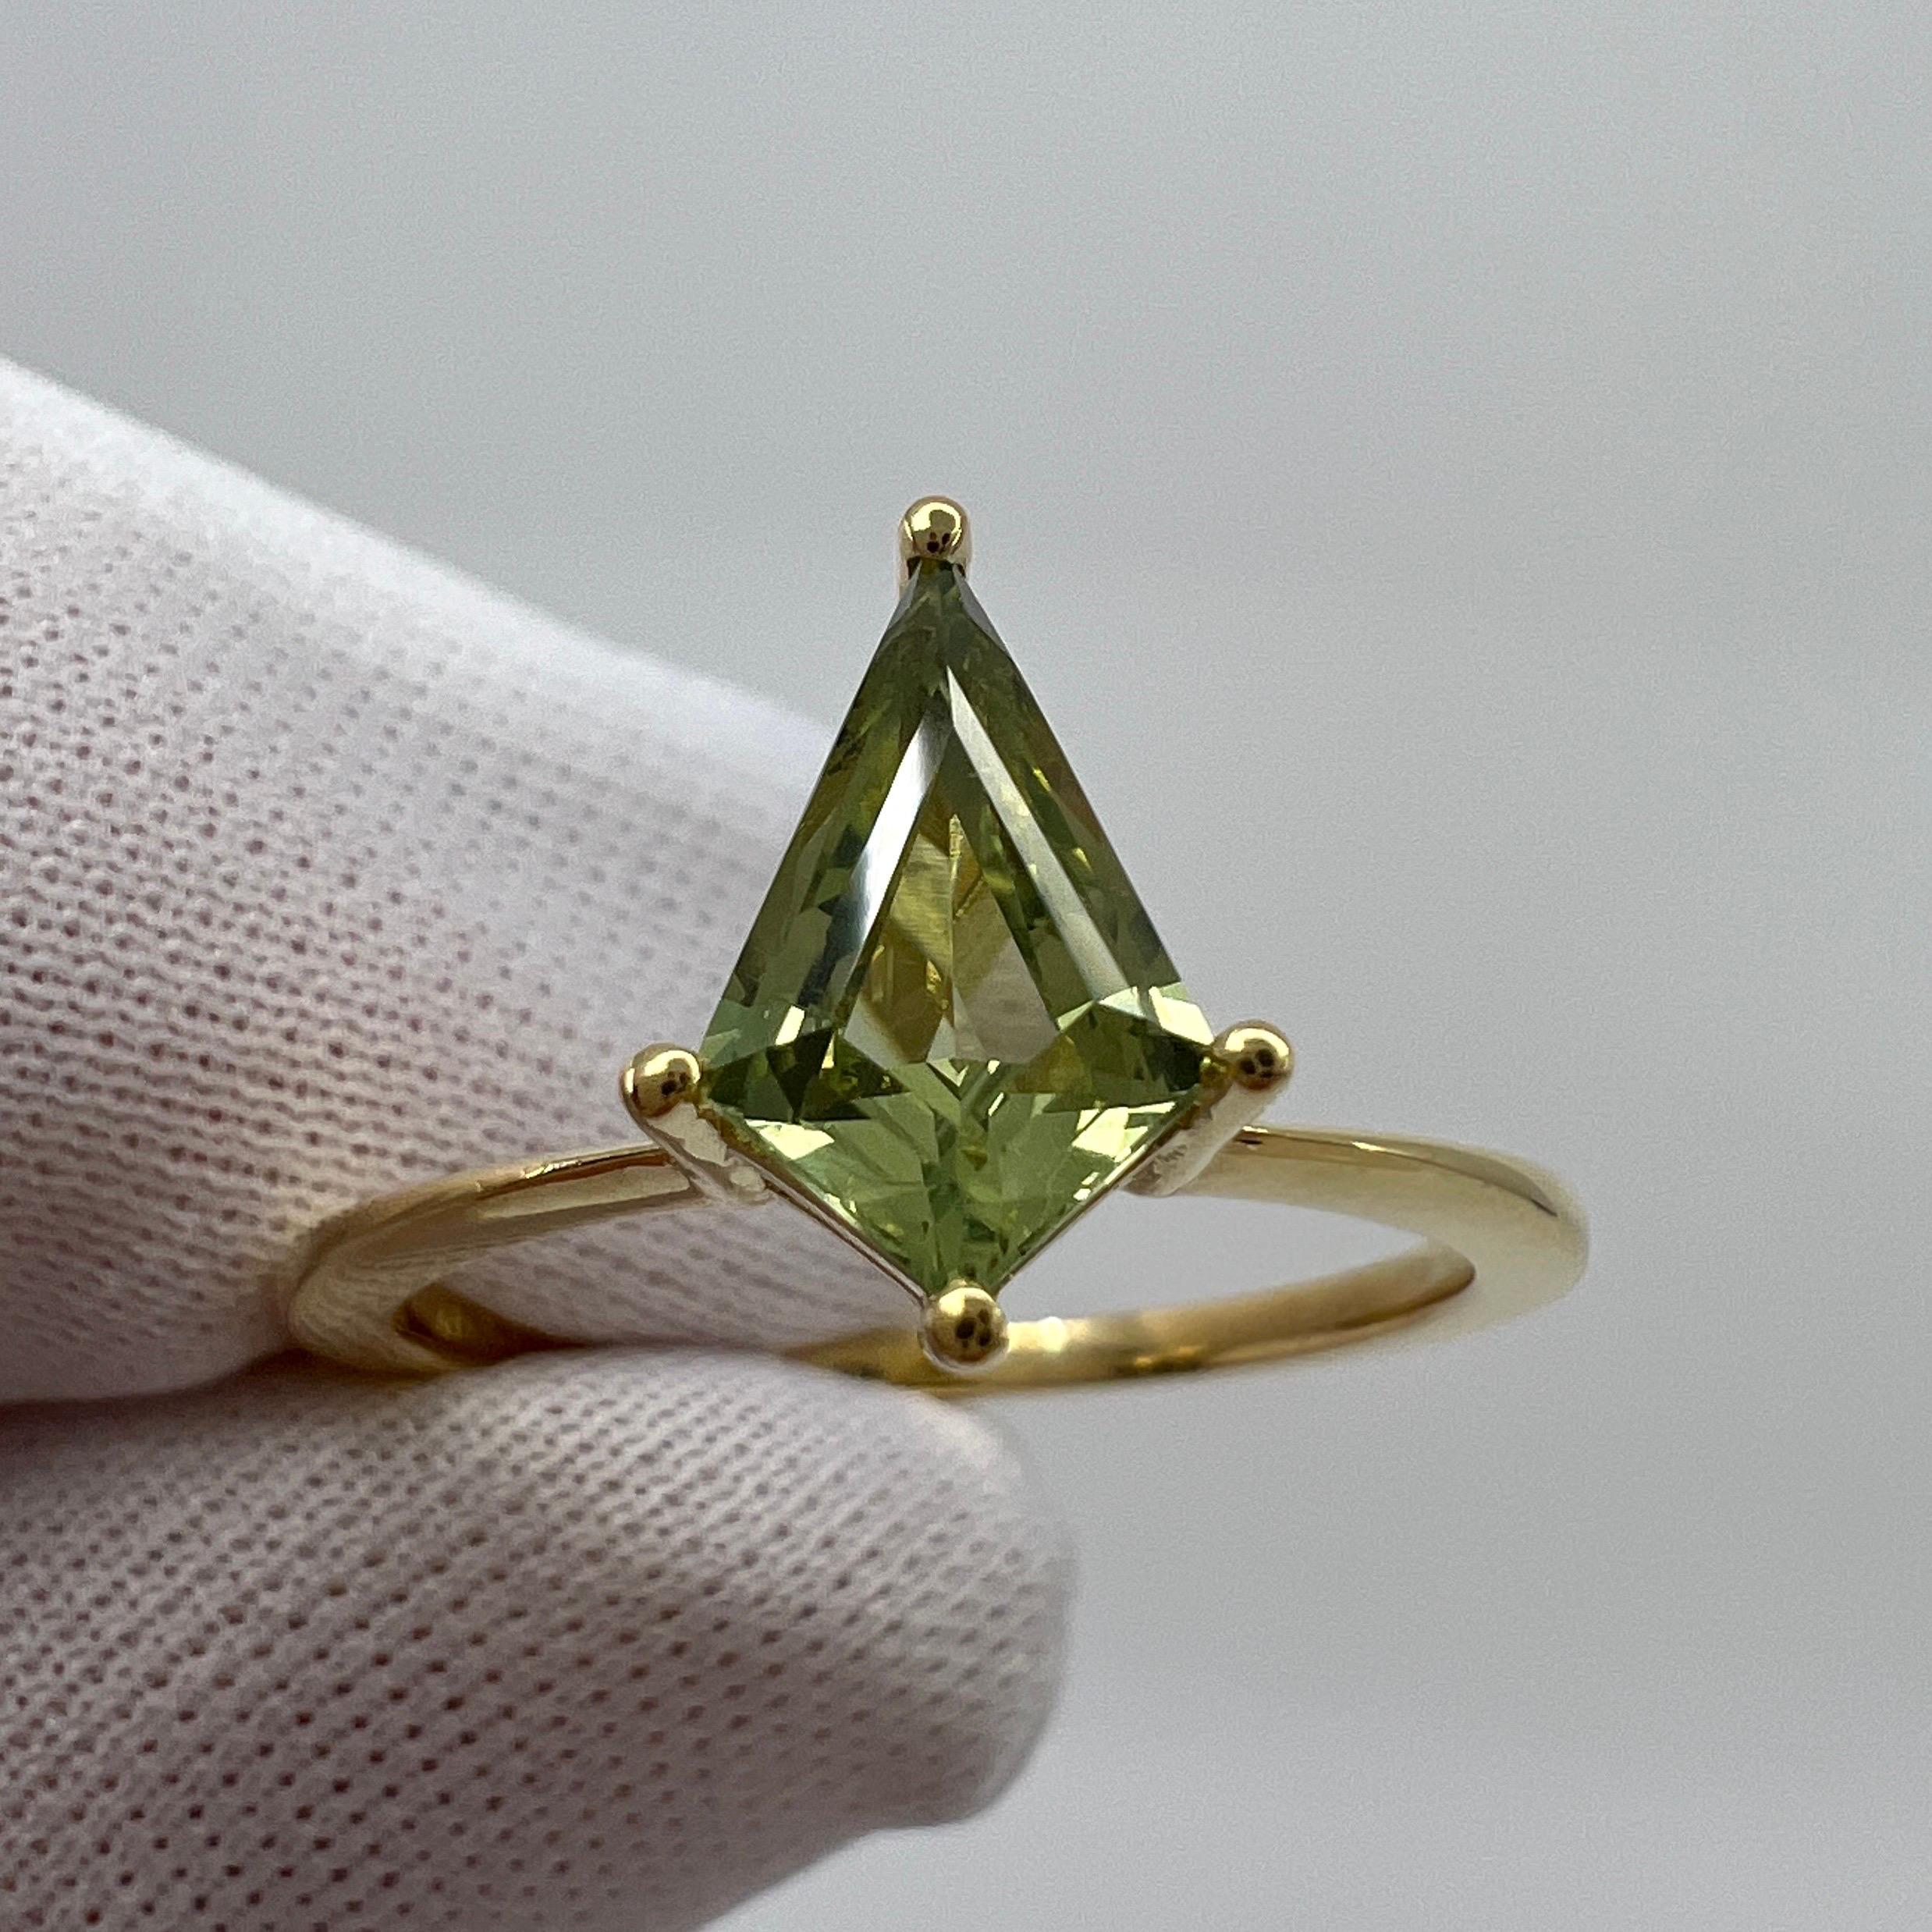 Mint Green Sapphire Fancy Kite Cut 18k Yellow Gold Modern Solitaire Ring.

1.13 Carat sapphire with a unique fancy kite cut and stunning light 'mint' green colour.

Set in a beautiful and delicate modern ring. 18k yellow gold.

Ring size UK N - US 7